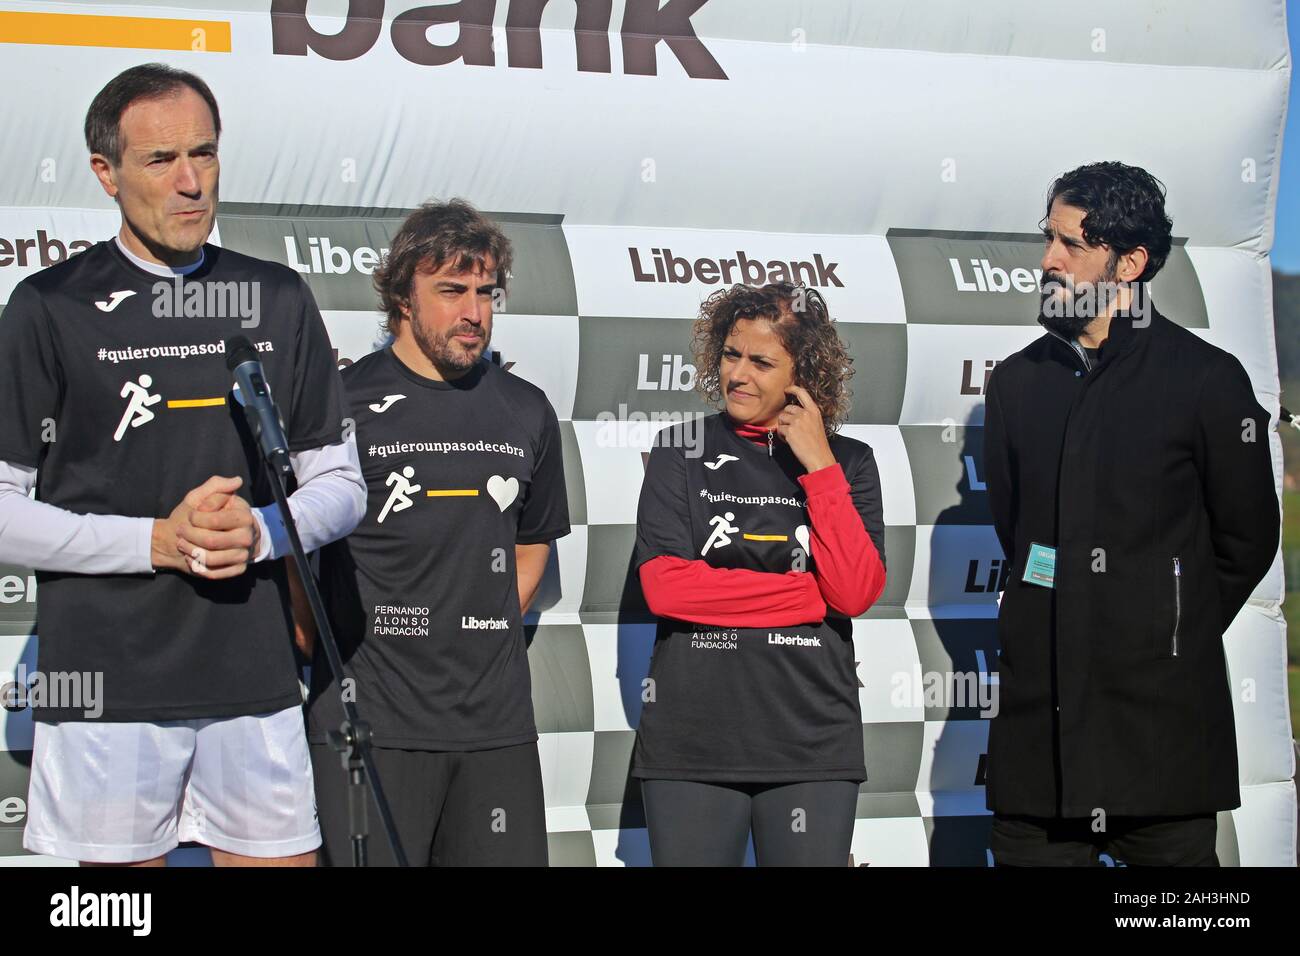 La Morgal, Spain. 24th Dec, 2019. La Morgal, SPAIN: The CEO of Liberbank, Manuel Menéndez (L), Fernando Alonso, the general director of sports of the Principality of Asturias, Beatriz Álvarez and the speaker of the event, Marco Rodríguez (R) on the podium during the IX Race Solidarity Foundation Fernando Alonso Liberbank disputed in the Circuit of Fernando Alonso of La Morgal, Spain on December 24, 2019. (Photo by Alberto Brevers/Pacific Press) Credit: Pacific Press Agency/Alamy Live News Stock Photo